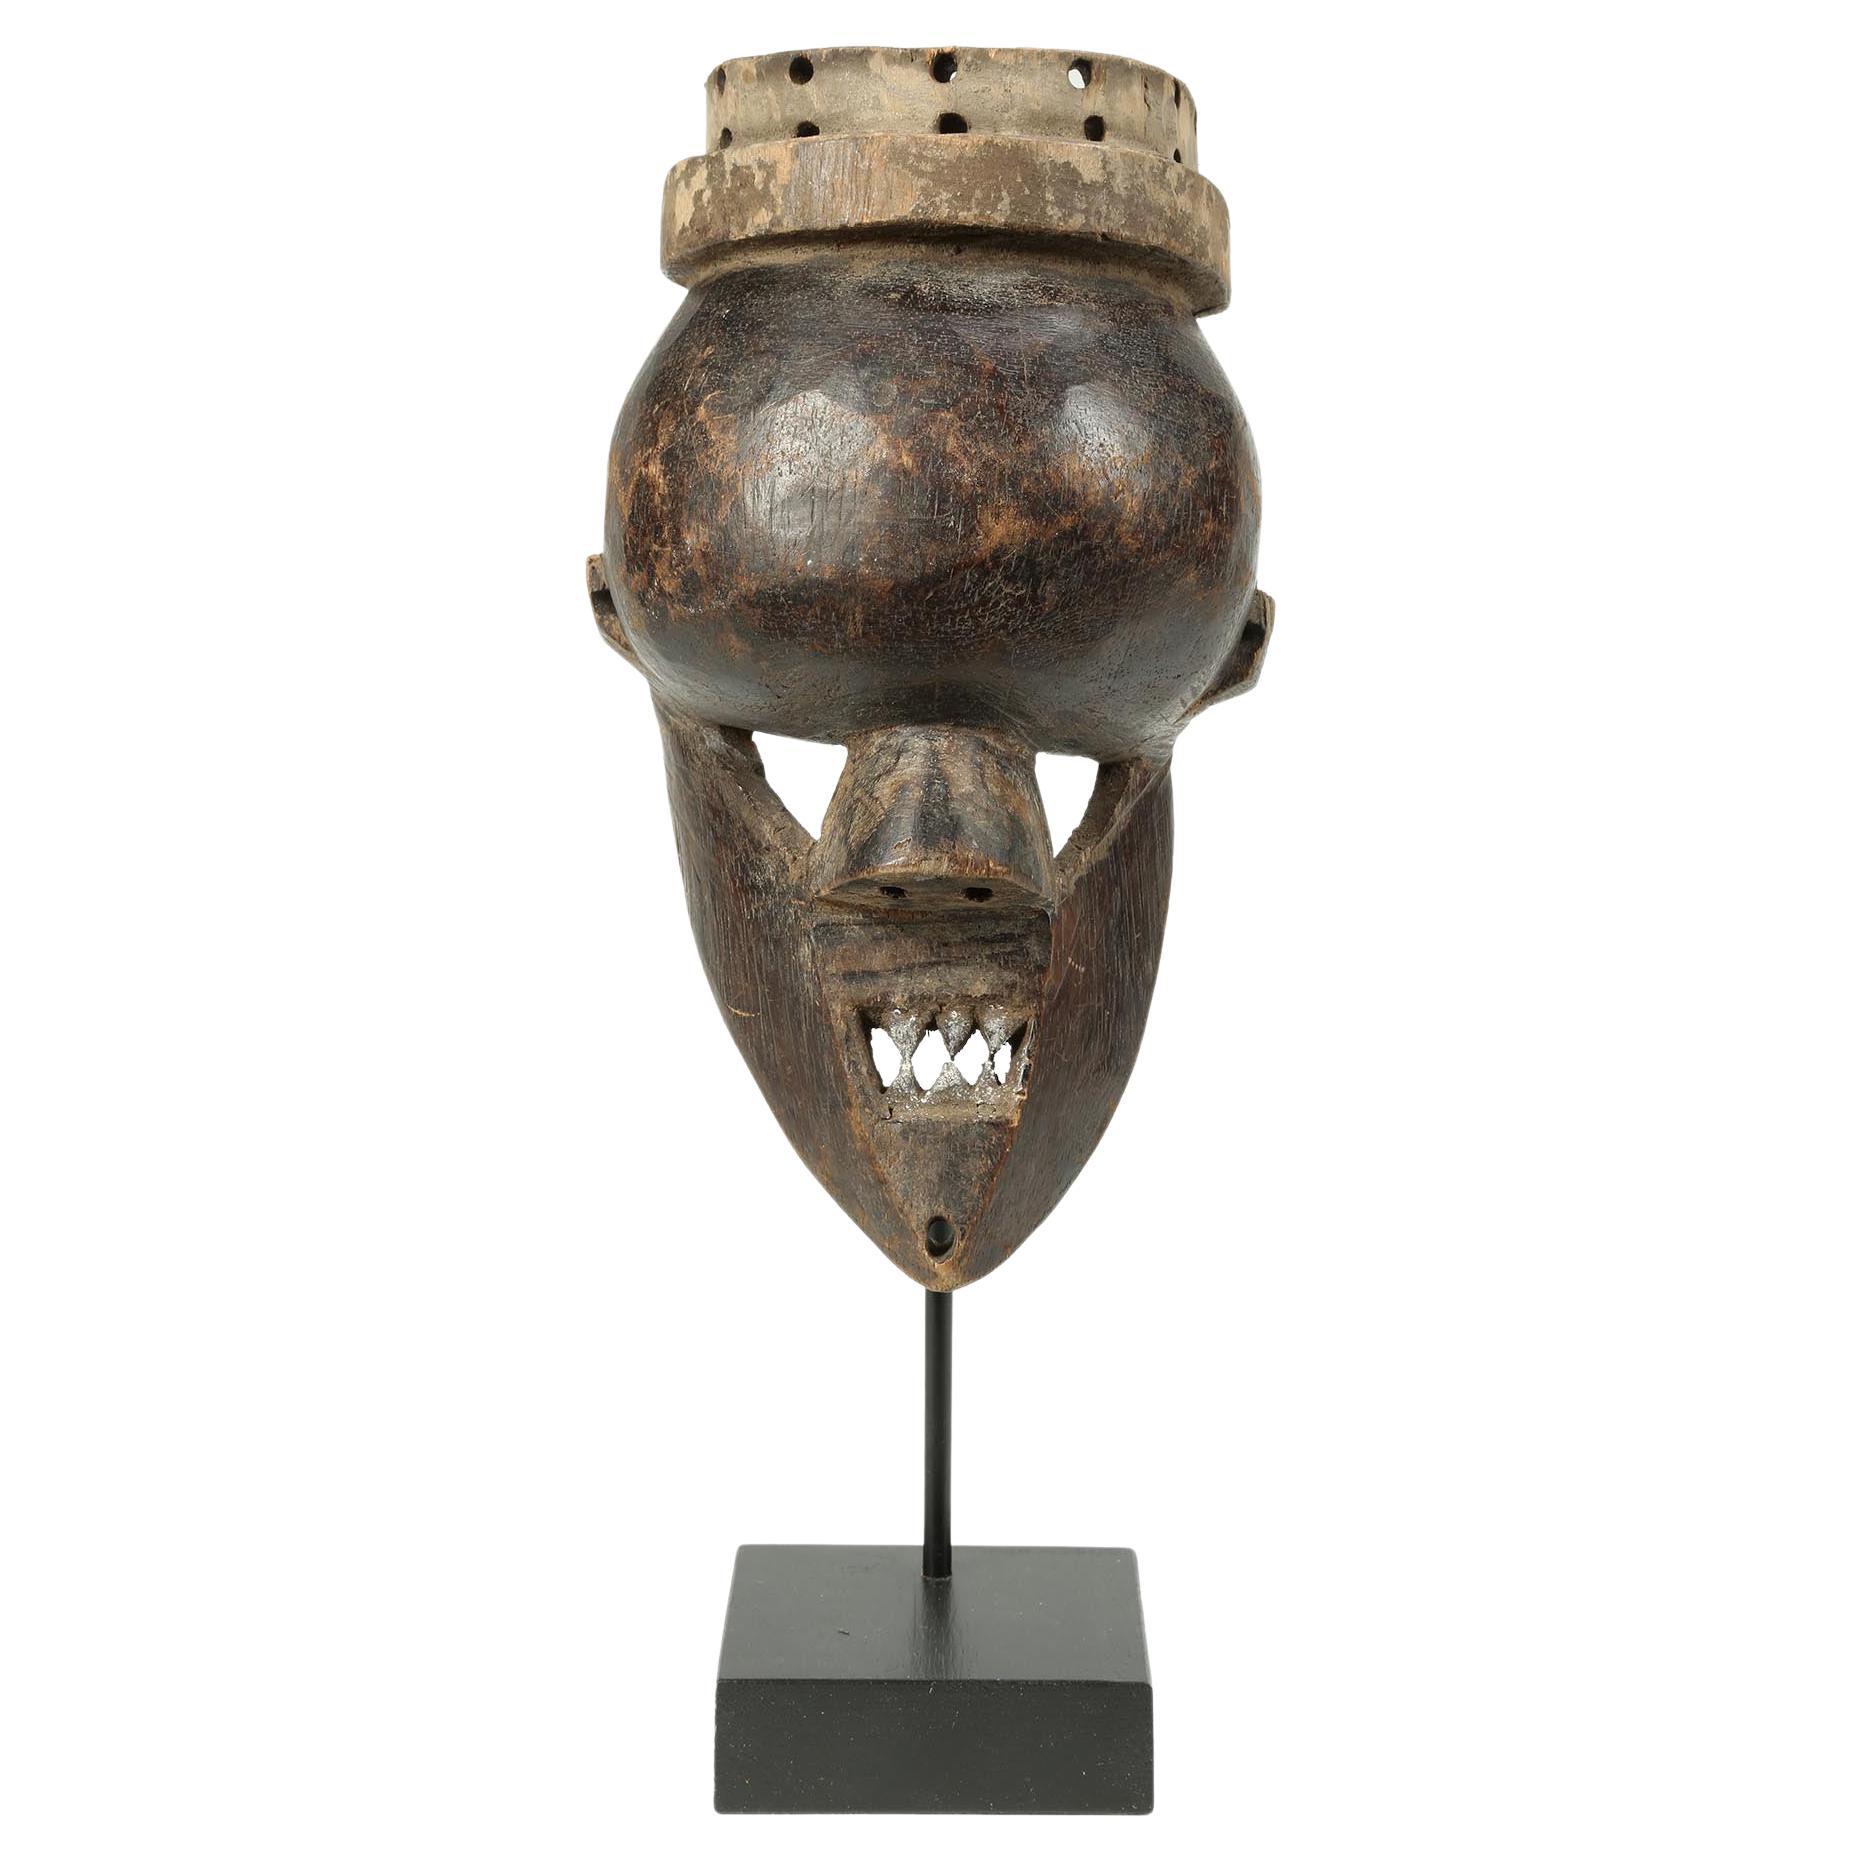 Early Small Salampasu Warrior's Mask, Zaire, Africa, Early 20th Century